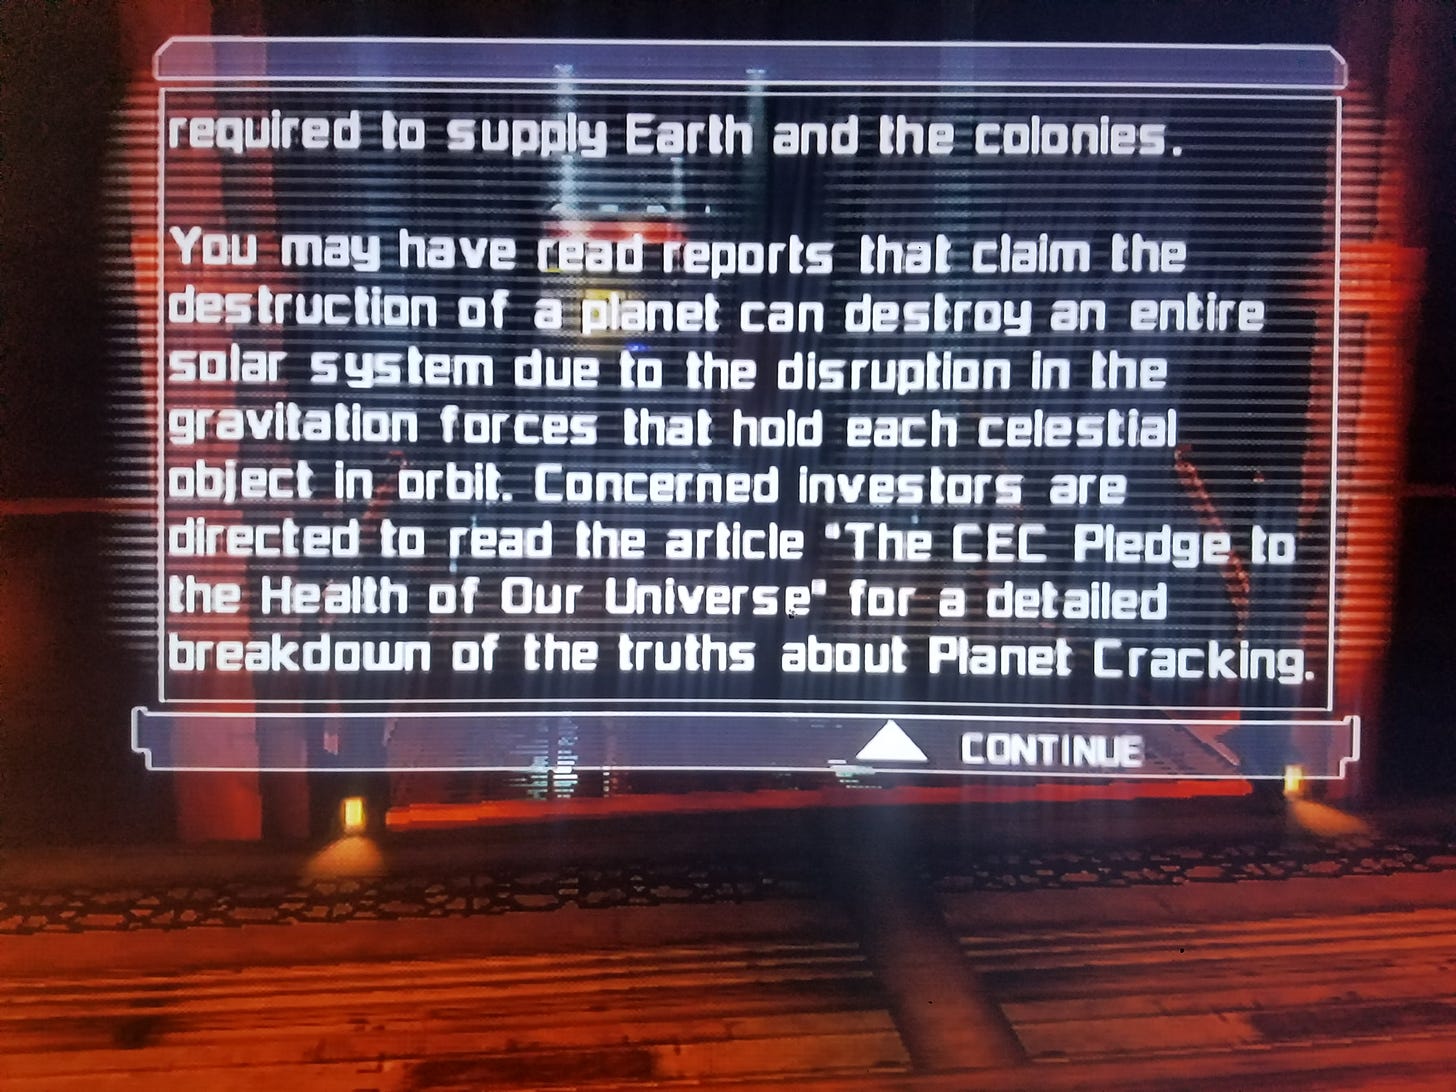 A photo of a text log from Extraction that reads, "You may have read reports that claim the destruction of a planet can destroy an entire solar system due to the disruption in the gravitation forces that hold each celestial object in orbit. Concerned investors are directed to read the article "The CEC Pledge to the Health of Our Universe" for a detailed breakdown of the truths about Planet Cracking."